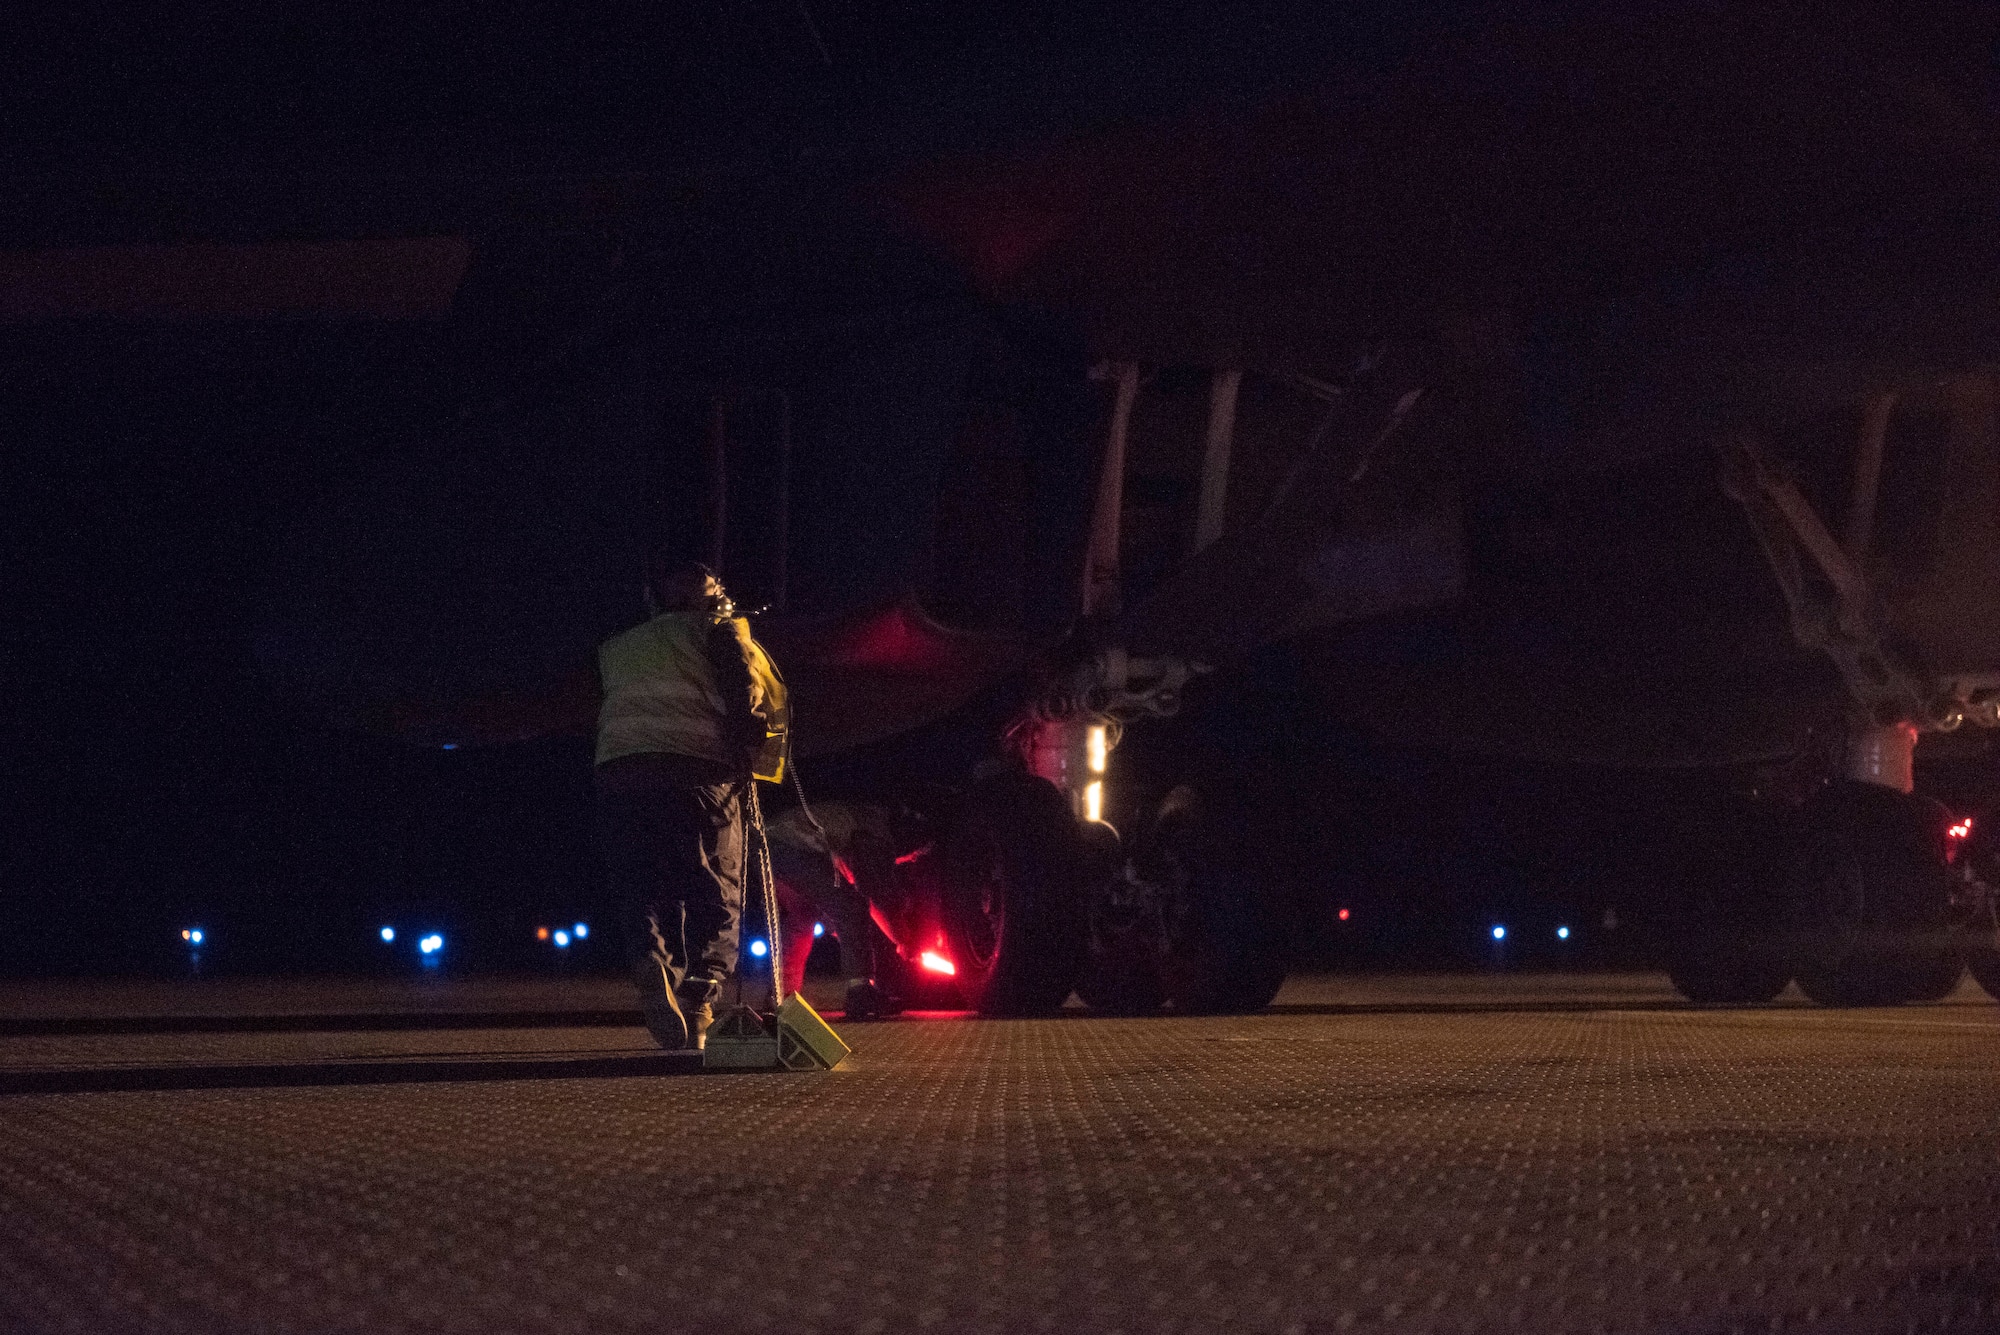 A crew chief assigned to the 9th Expeditionary Bomb Squadron drags aircraft tire chocks toward the rear landing gear of a B-1B Lancer at Ørland Air Force Station, Norway, March 19, 2021. Upon landing, aircraft maintainers are responsible for catching the jet and performing necessary immediate actions, such as chocking the tires and replacing “Remove Before Flight'' safety tags. (U.S. Air Force photo by Airman 1st Class Colin Hollowell)